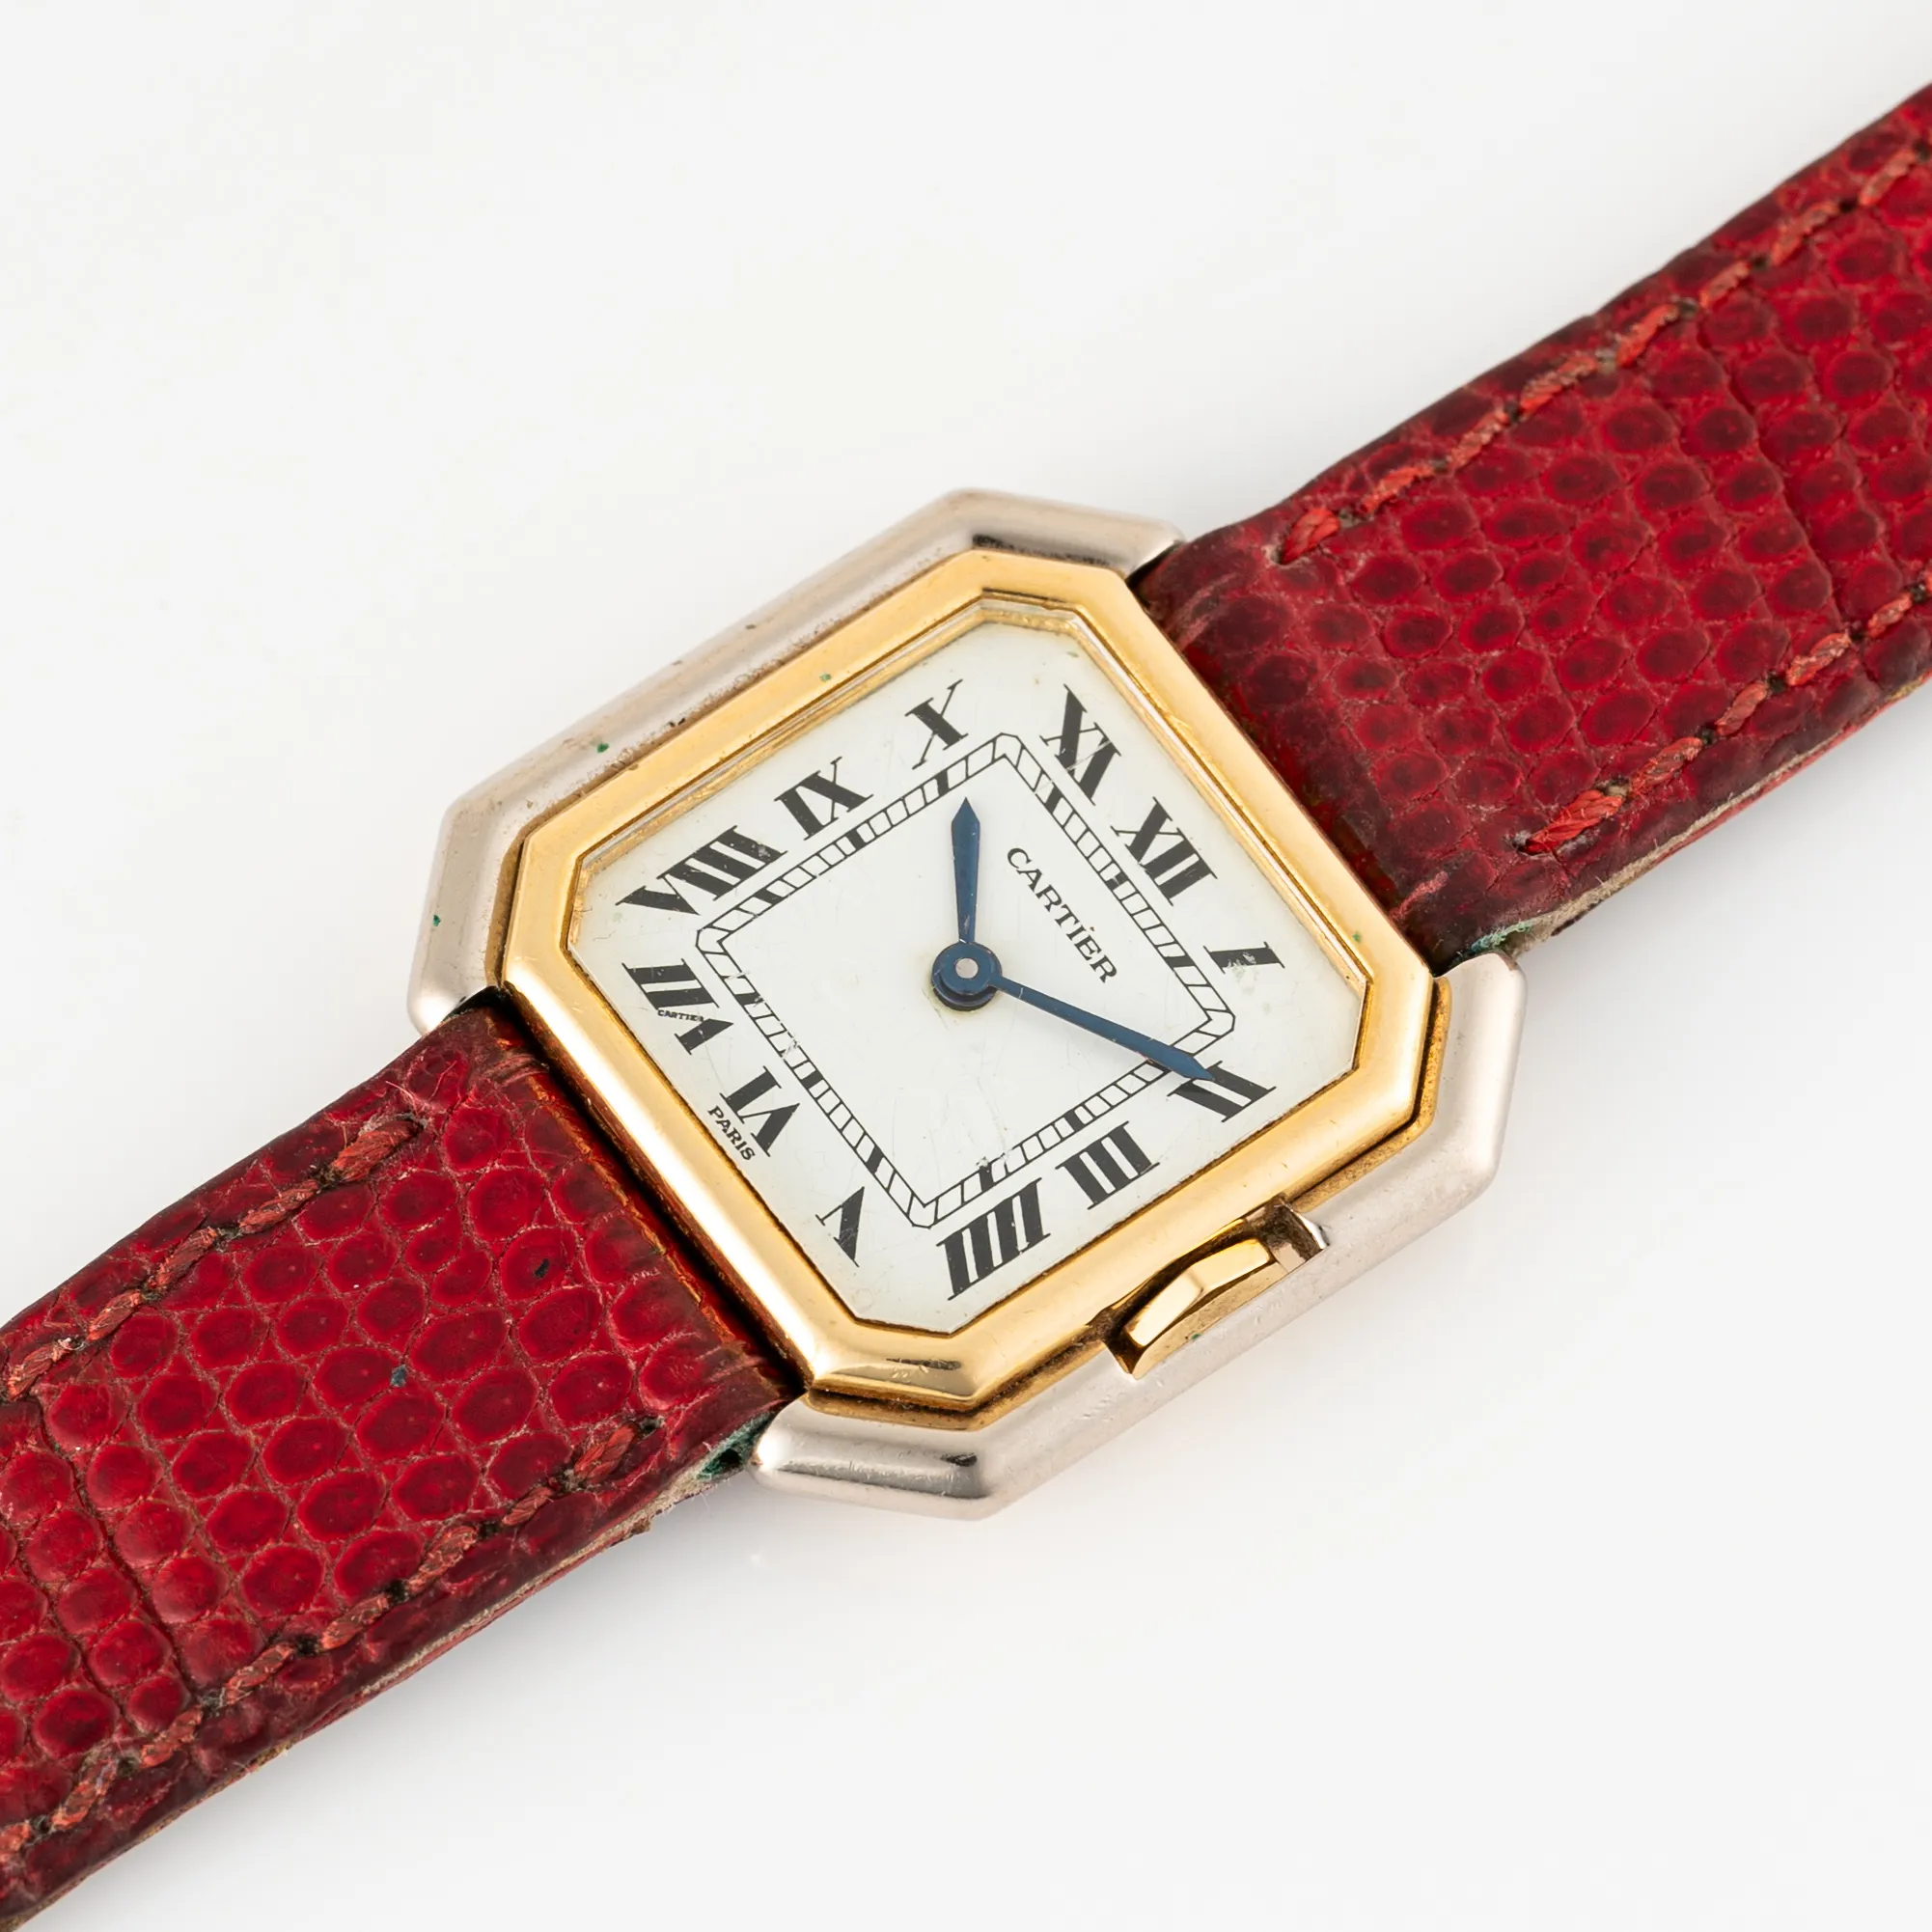 Cartier Ceinture 78210 24.5mm Yellow gold and white gold 1